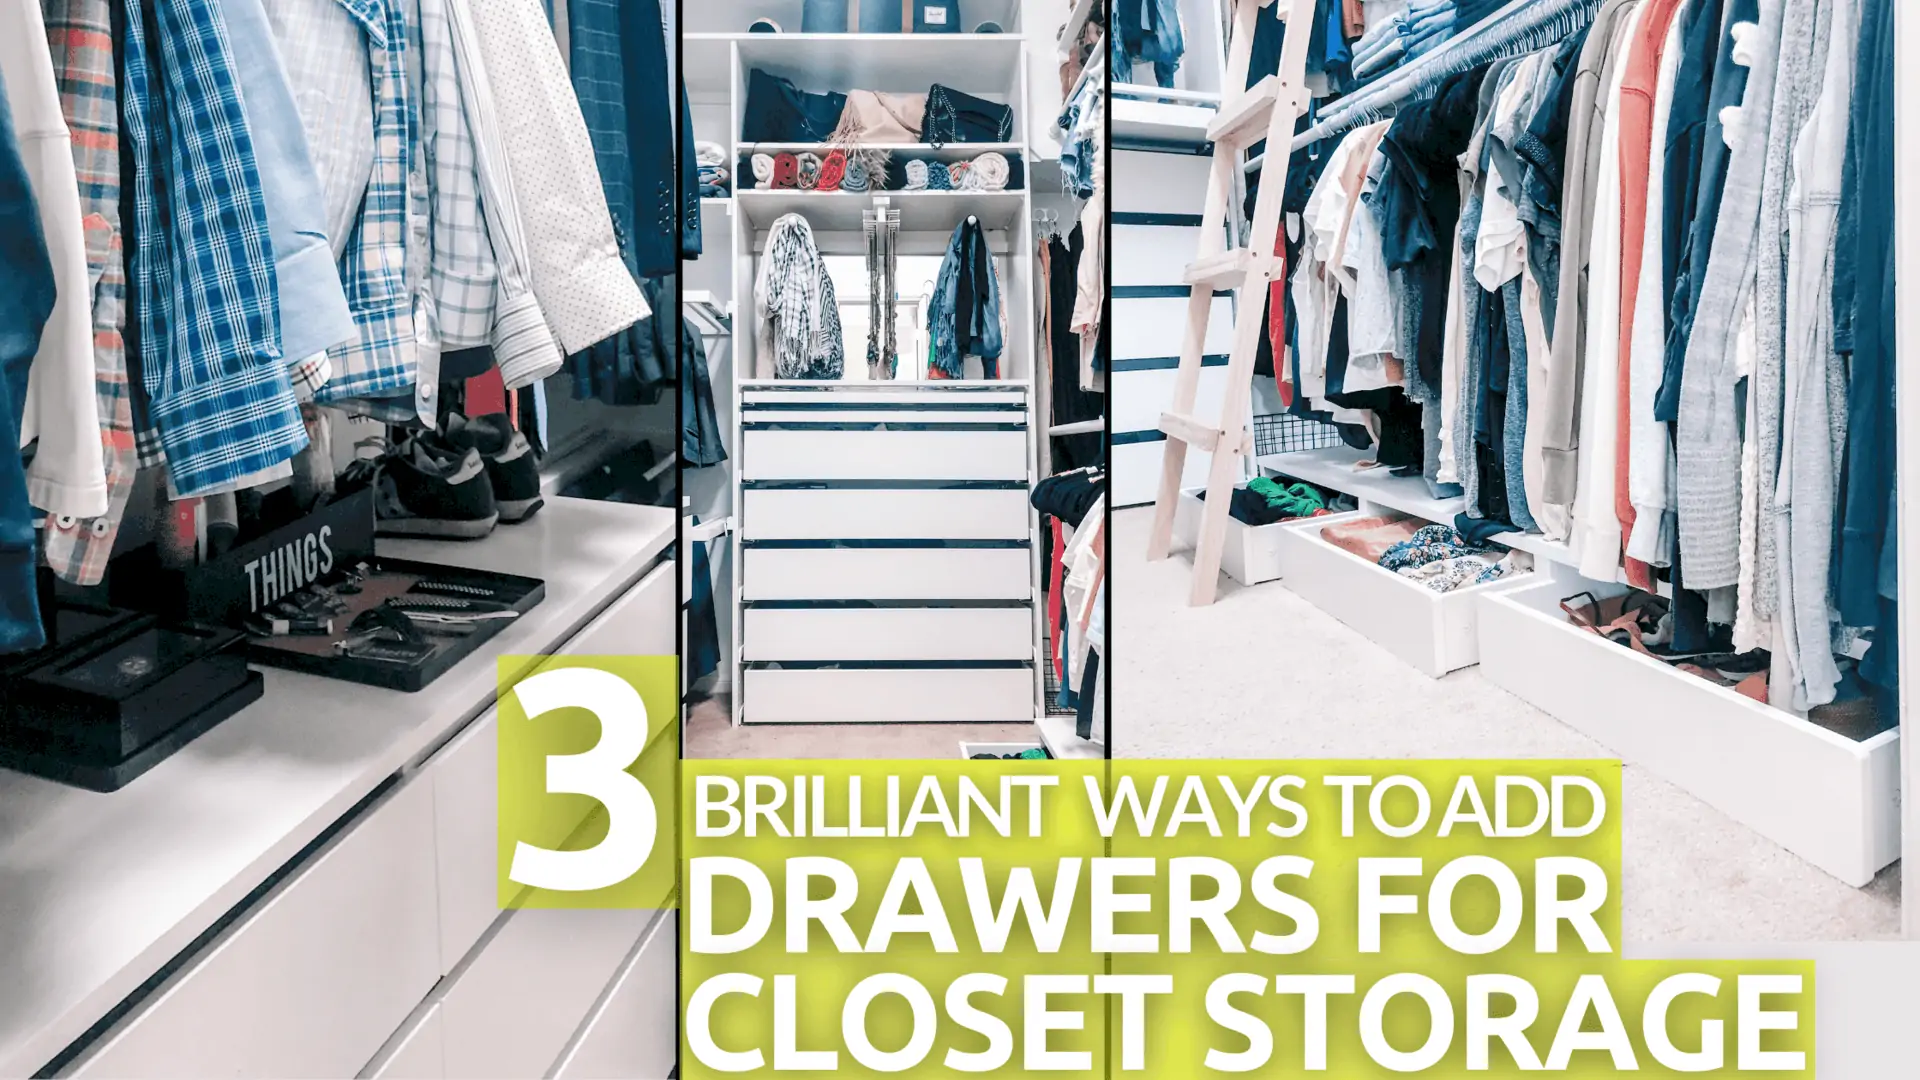 https://www.thediyvibe.com/wp-content/uploads/2021/08/3-ways-to-add-drawers-for-closet-storage.webp